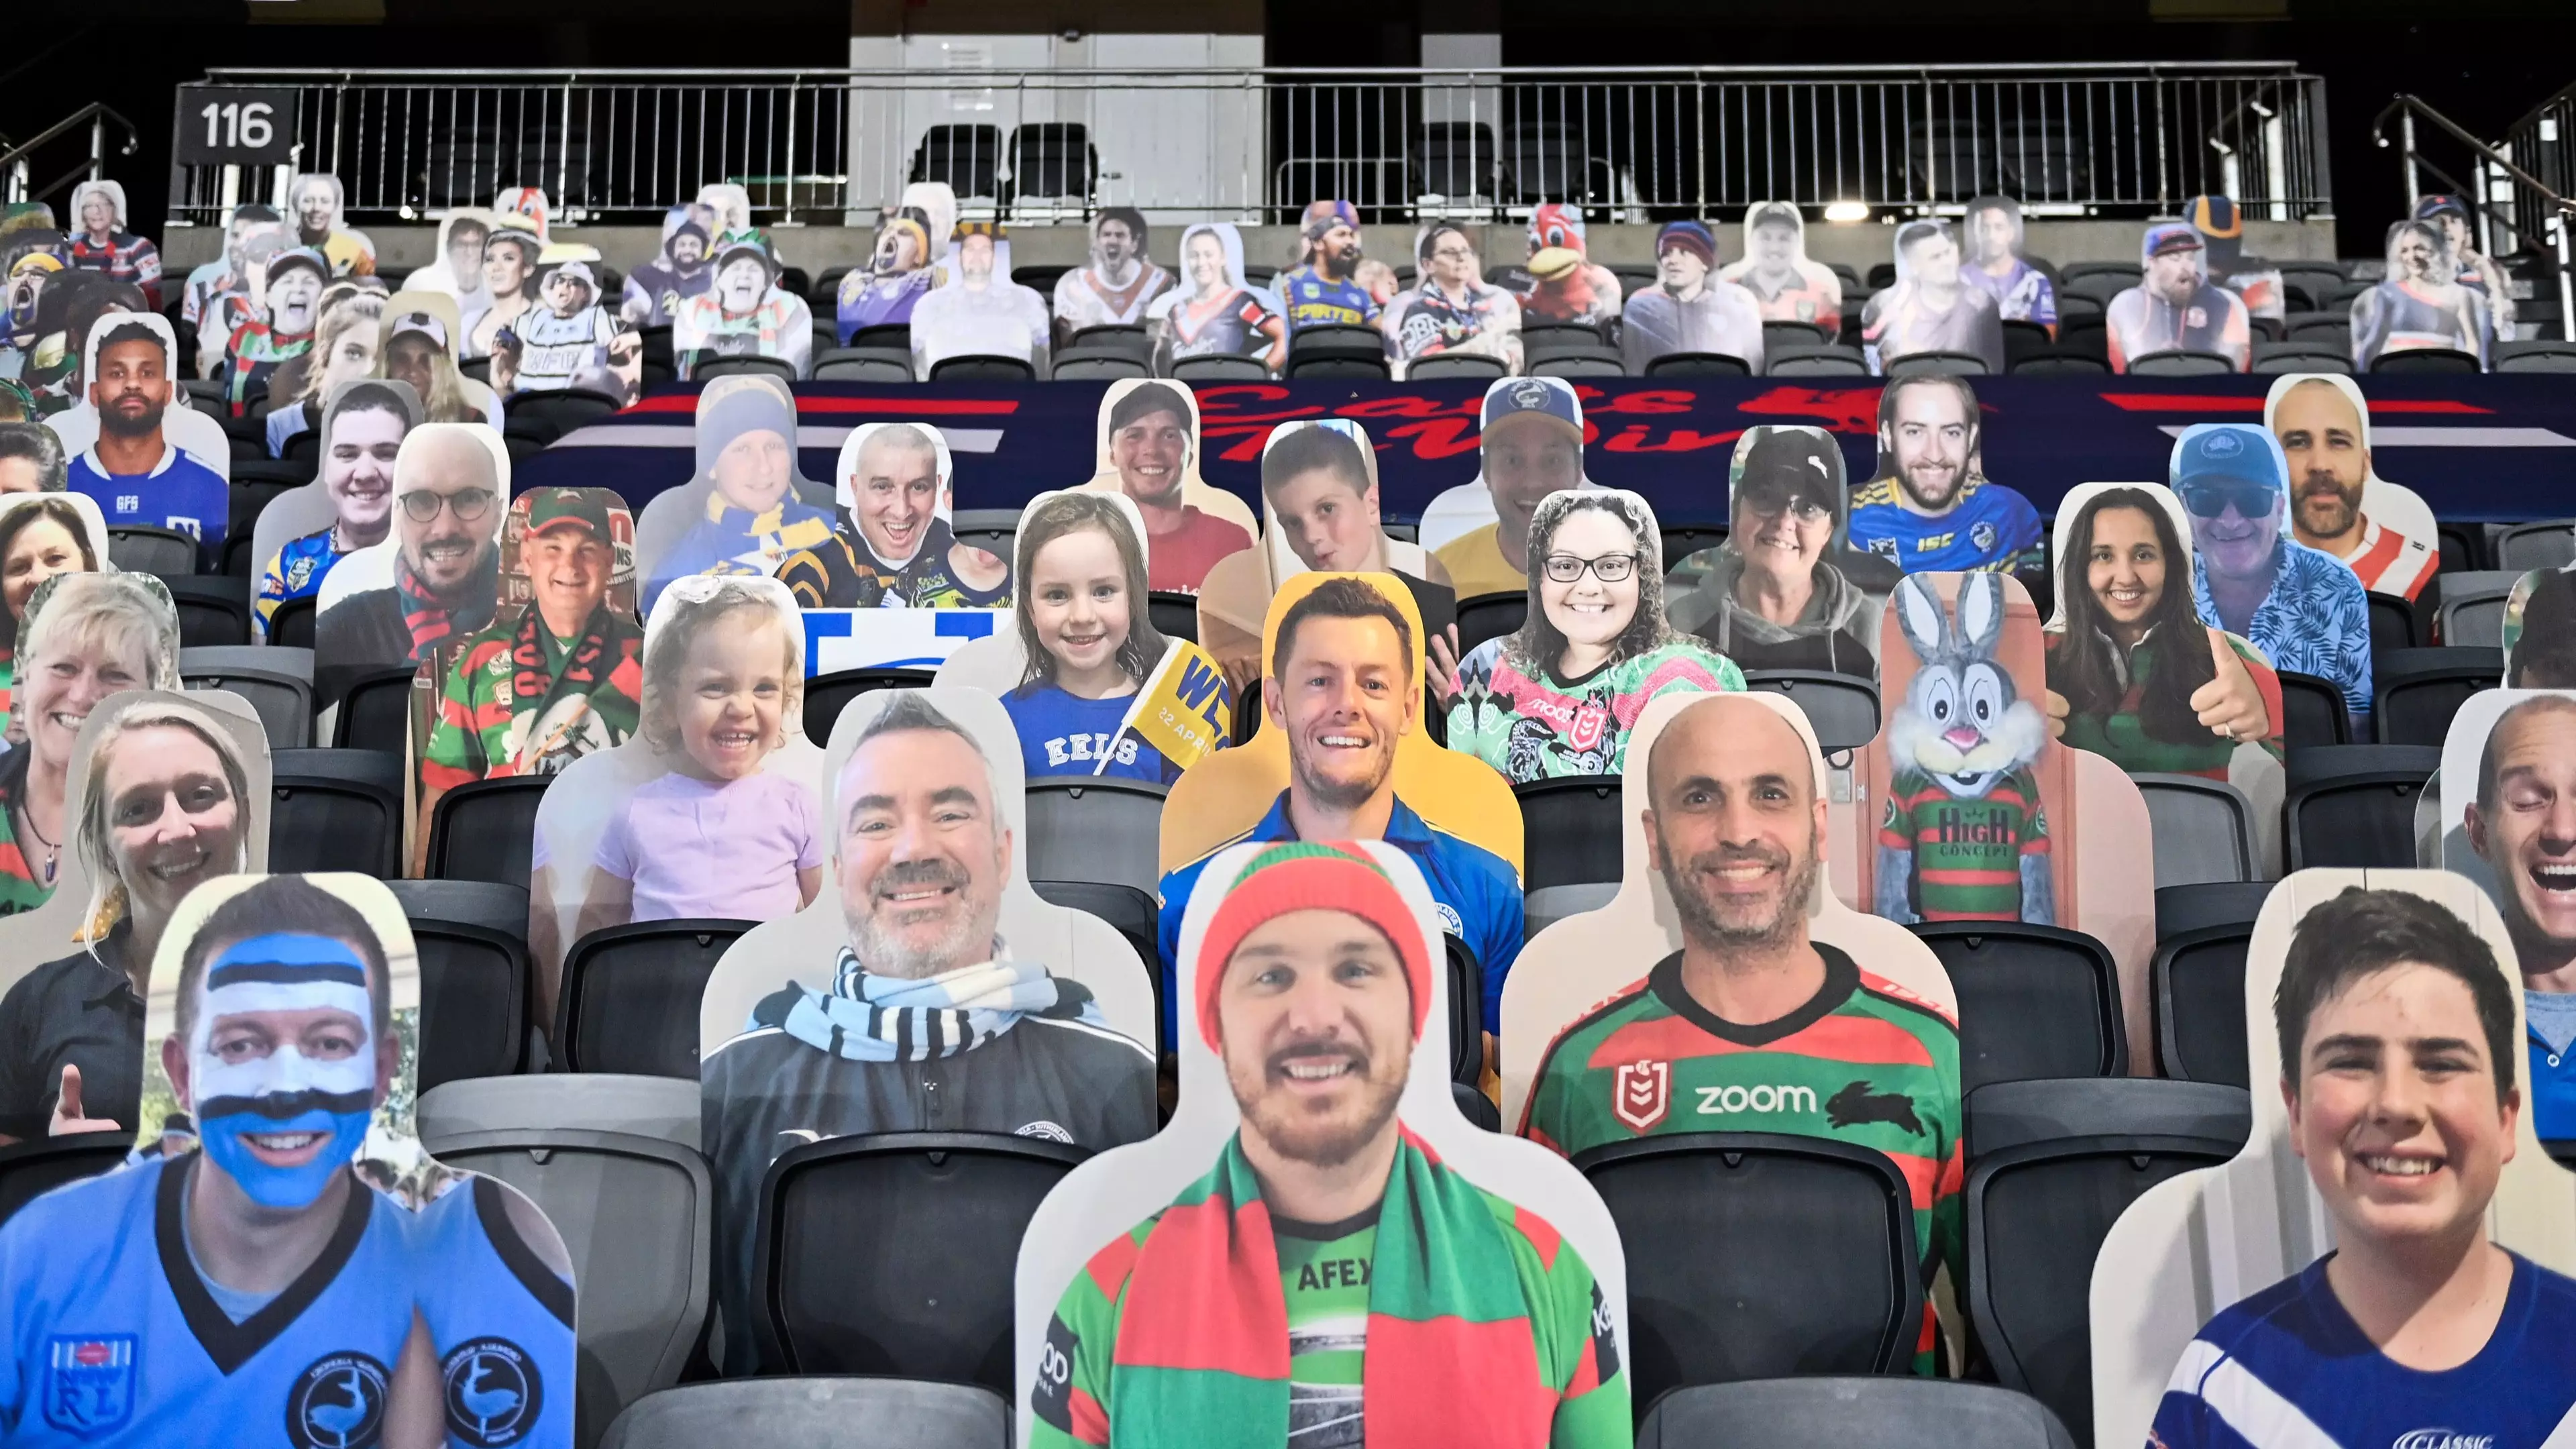 The NRL's Fan Cardboard Cutout Offer Feature Divides Opinion